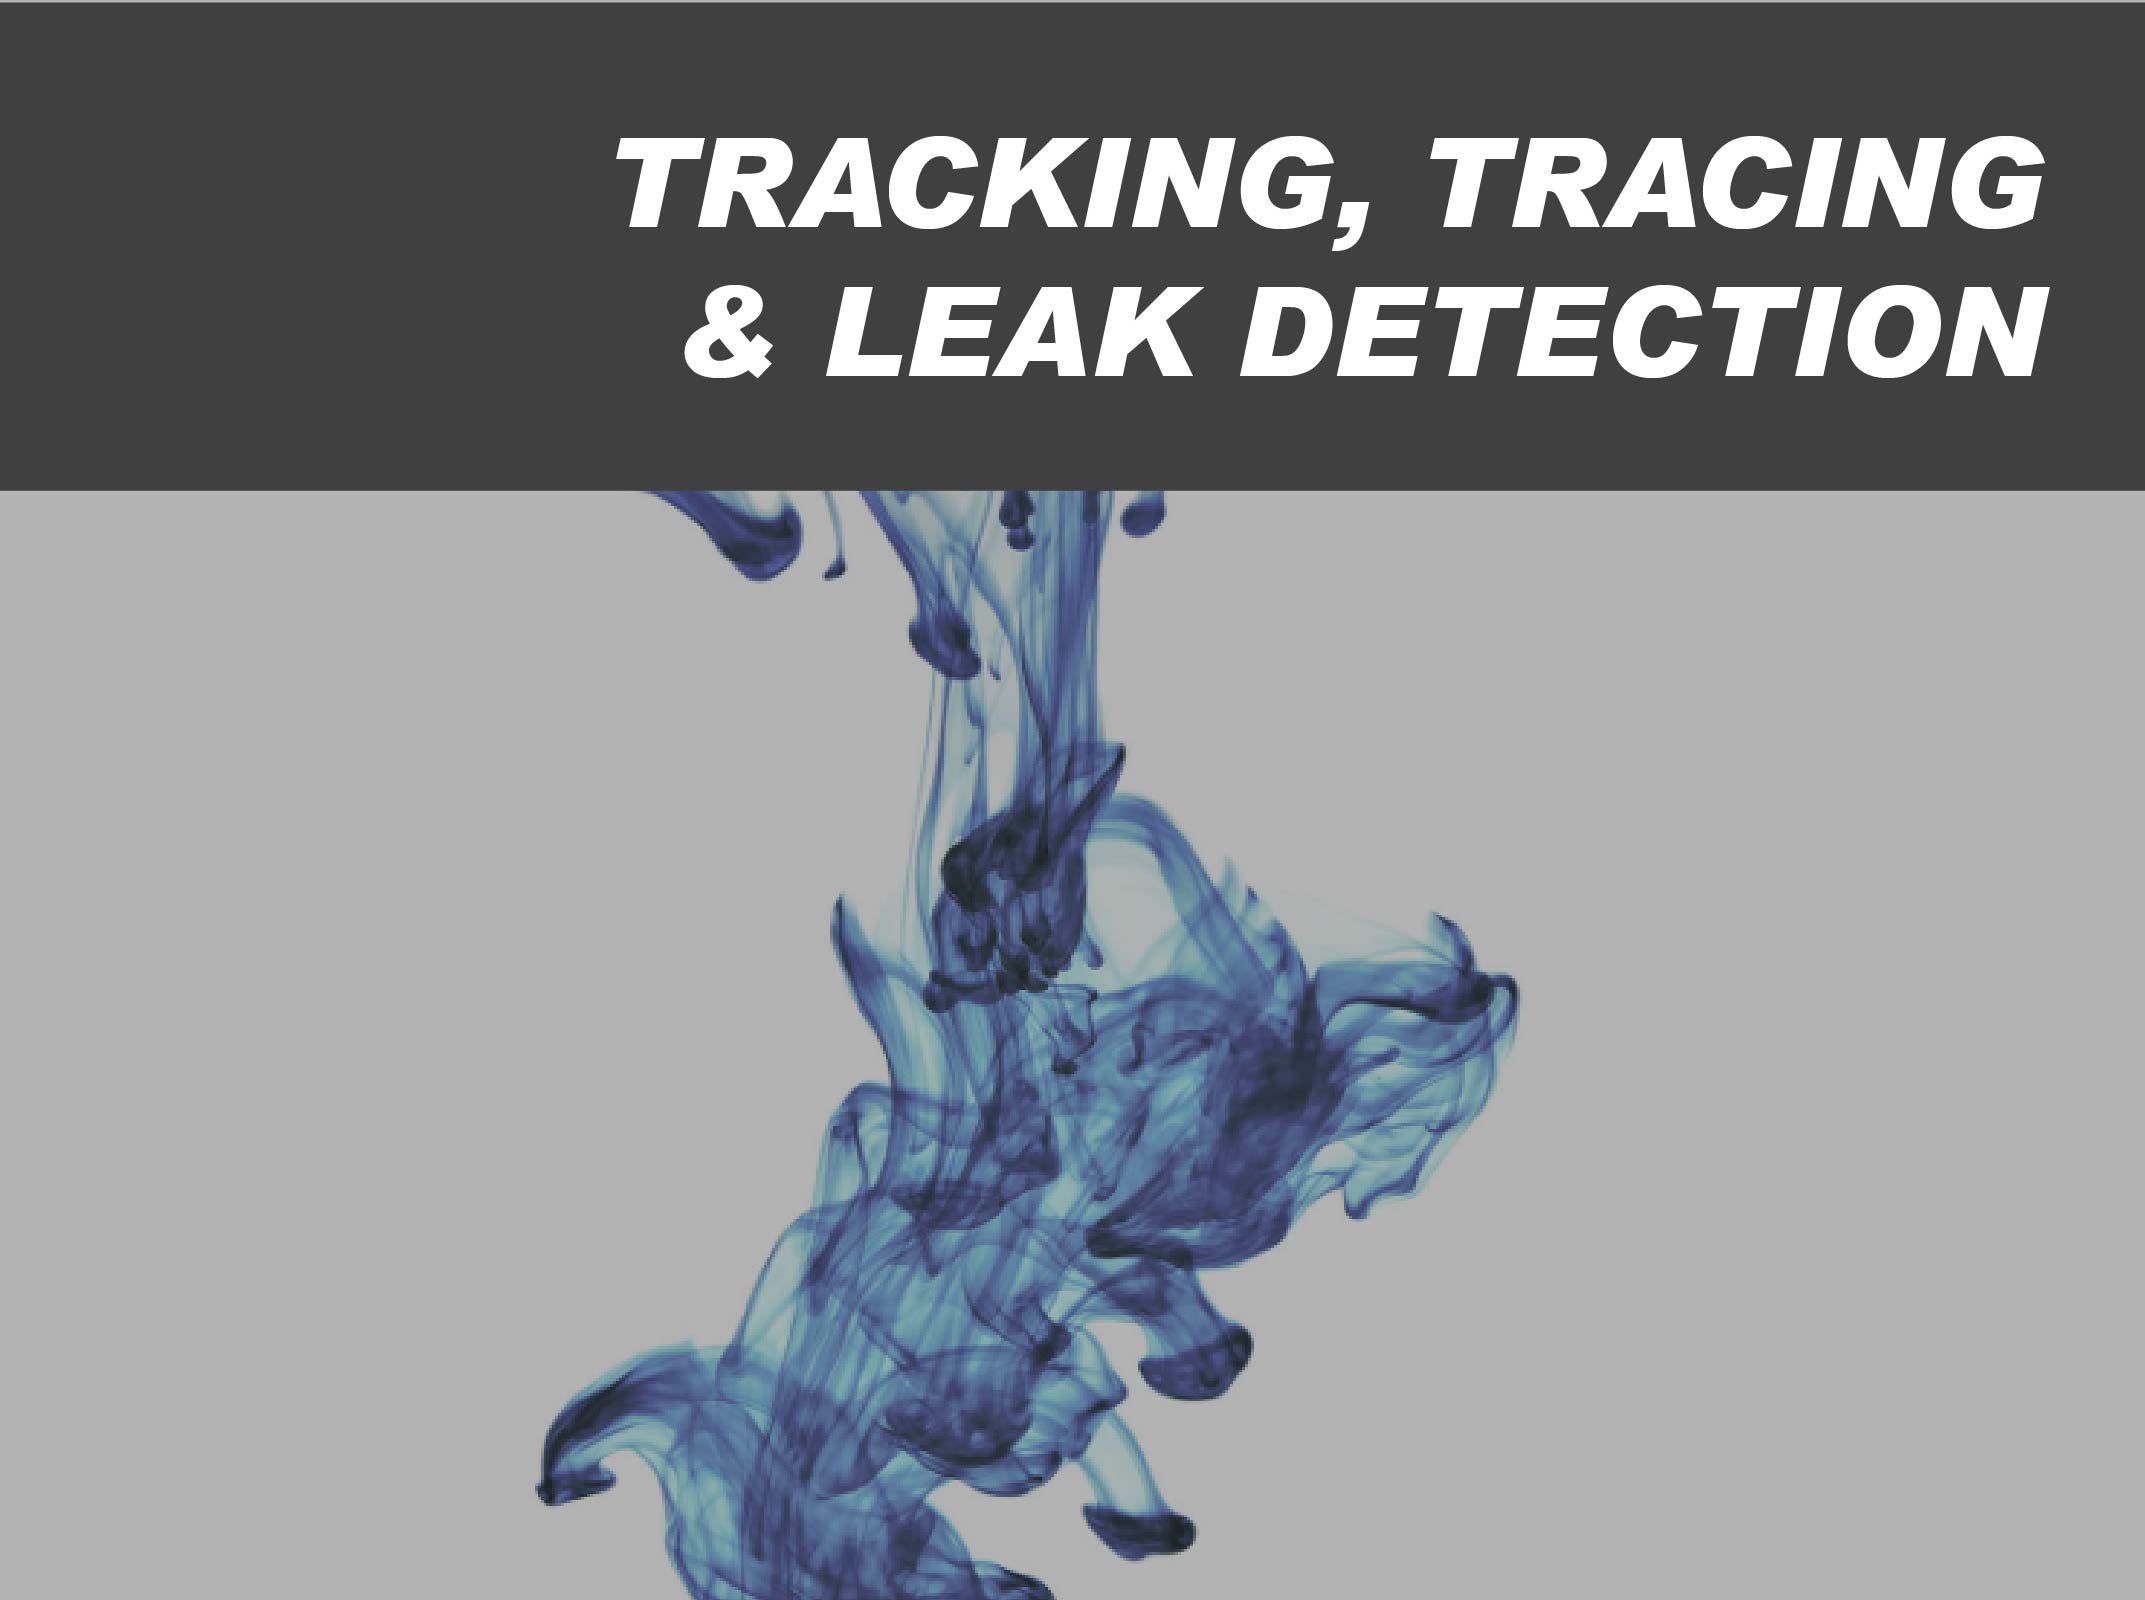 Tracking, Tracing & Leak Detection